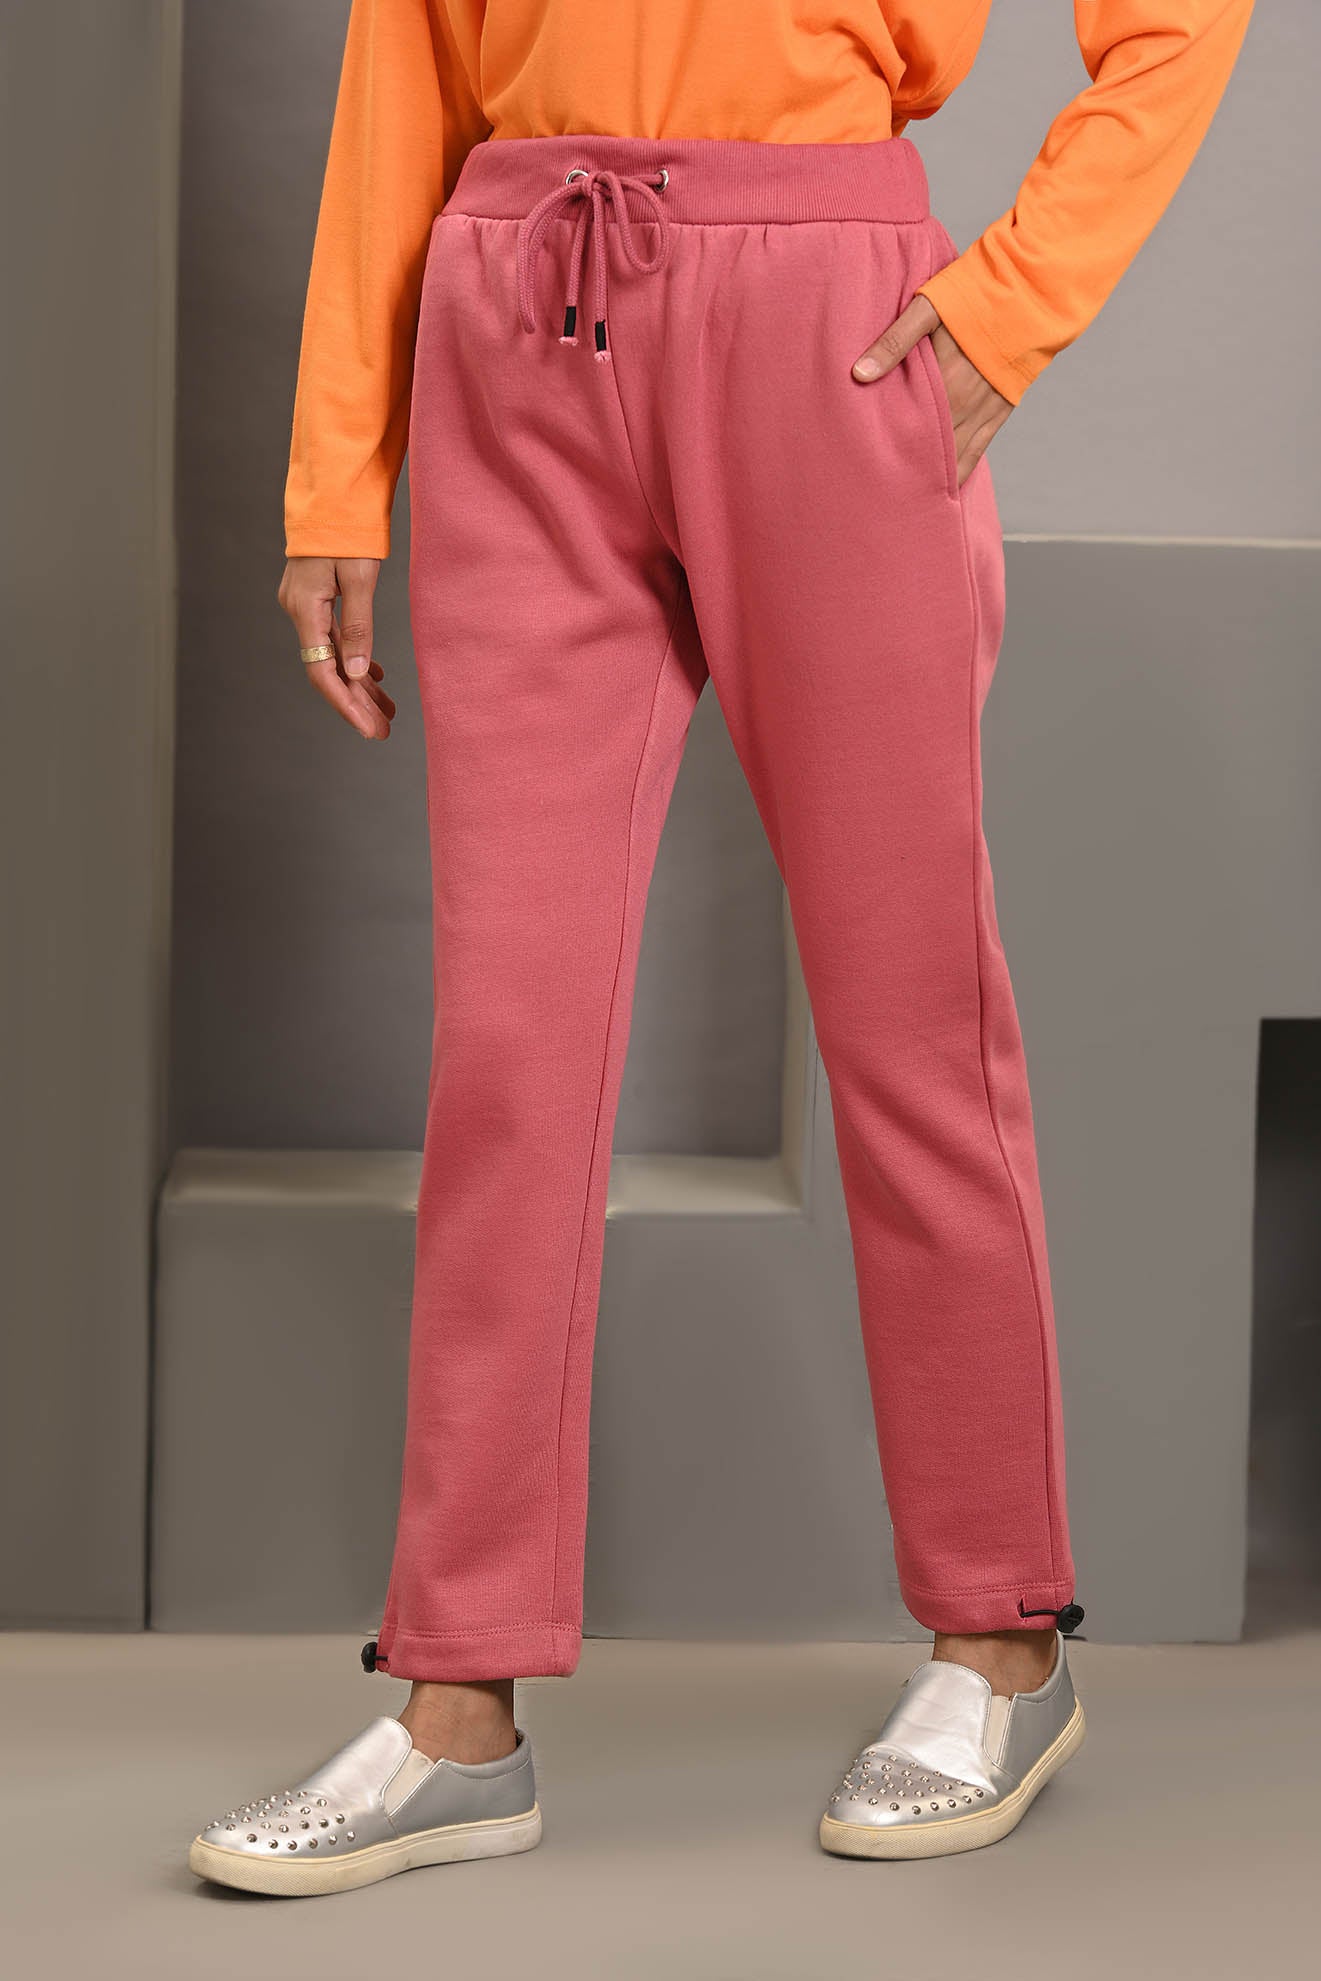 LT-A1553 PULL ON TROUSER DUSTY ROSE